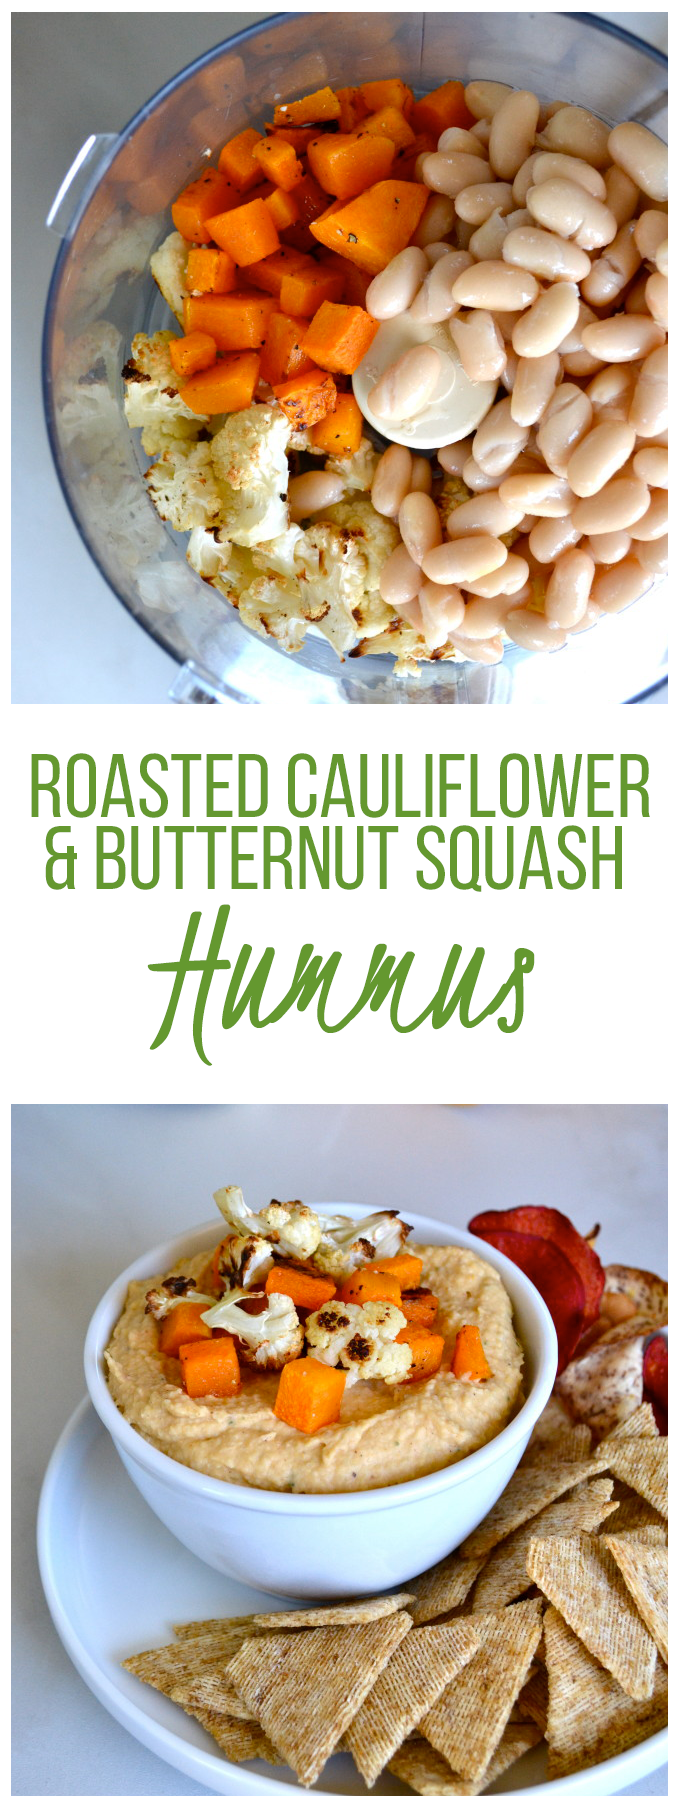 Roasted Cauliflower and Butternut Squash Hummus - a healthy and flavorful roasted dip!